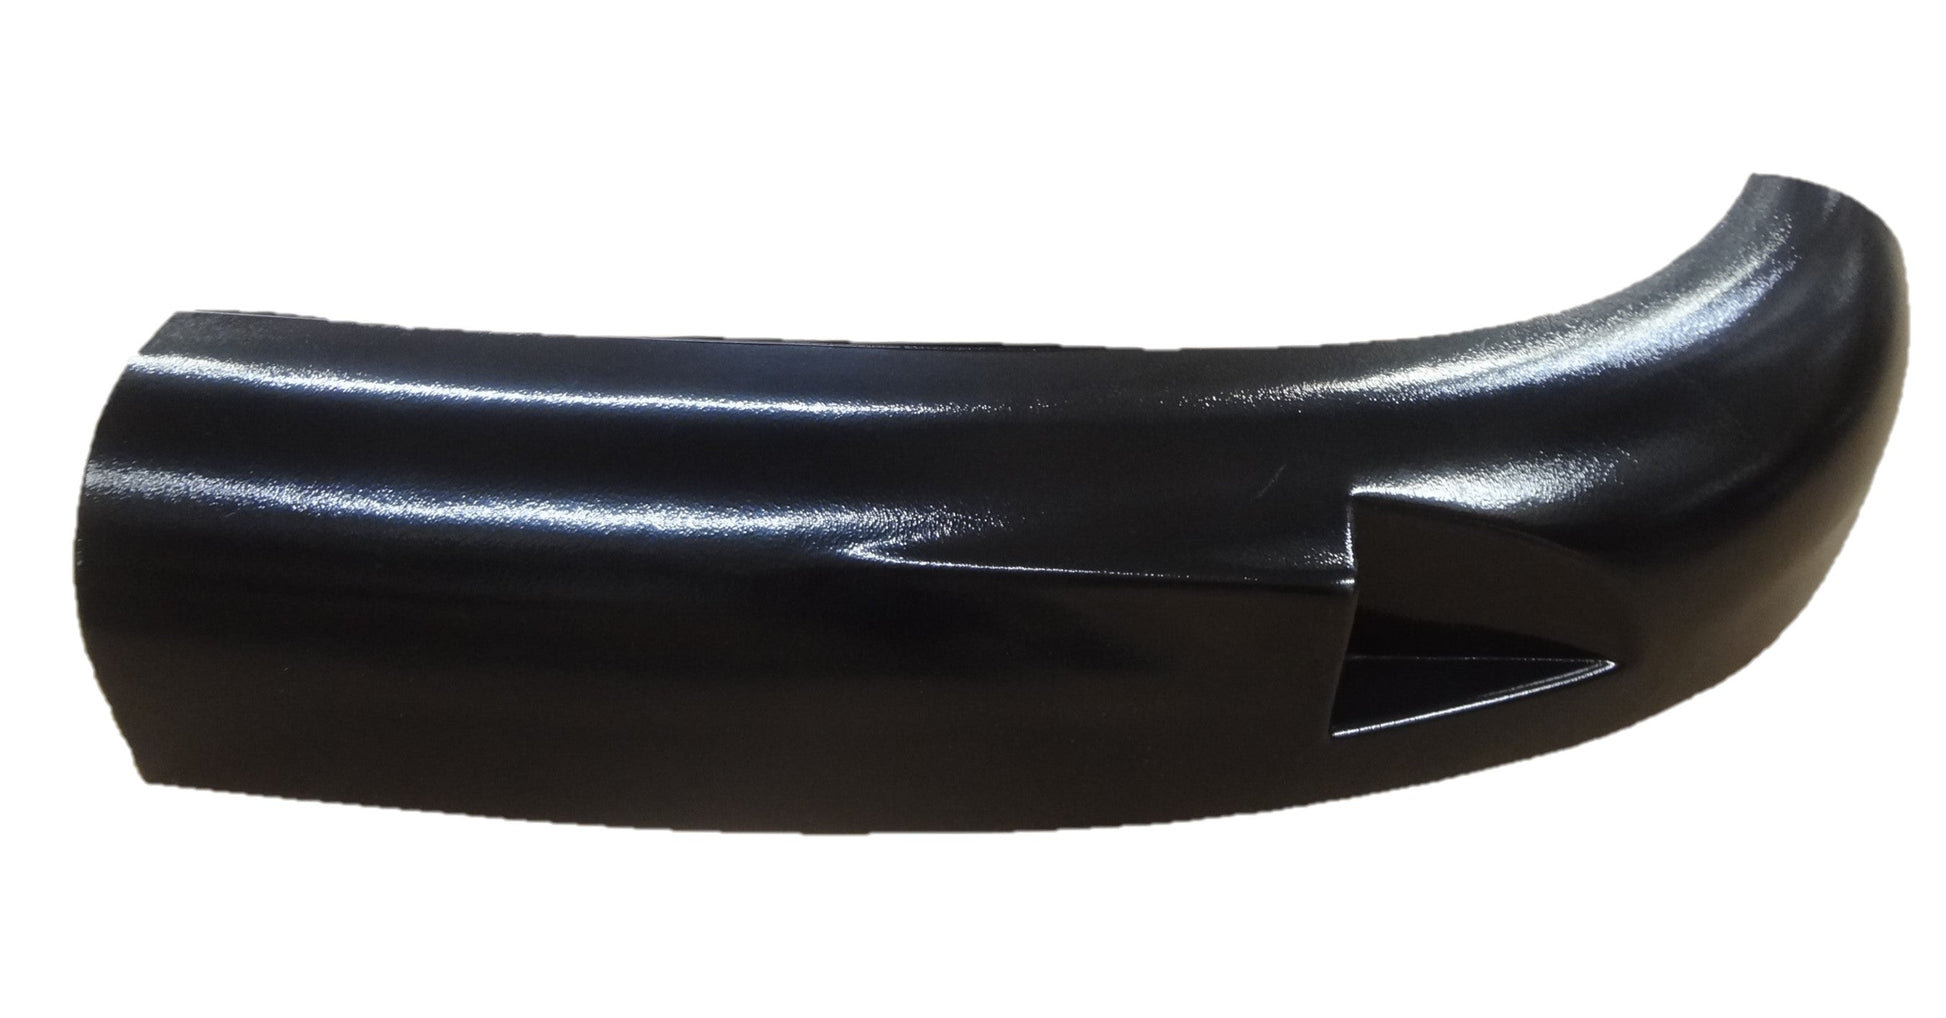 Airstream Rear Curbside Underbelly Haircell Wrap, Black - 200545-02